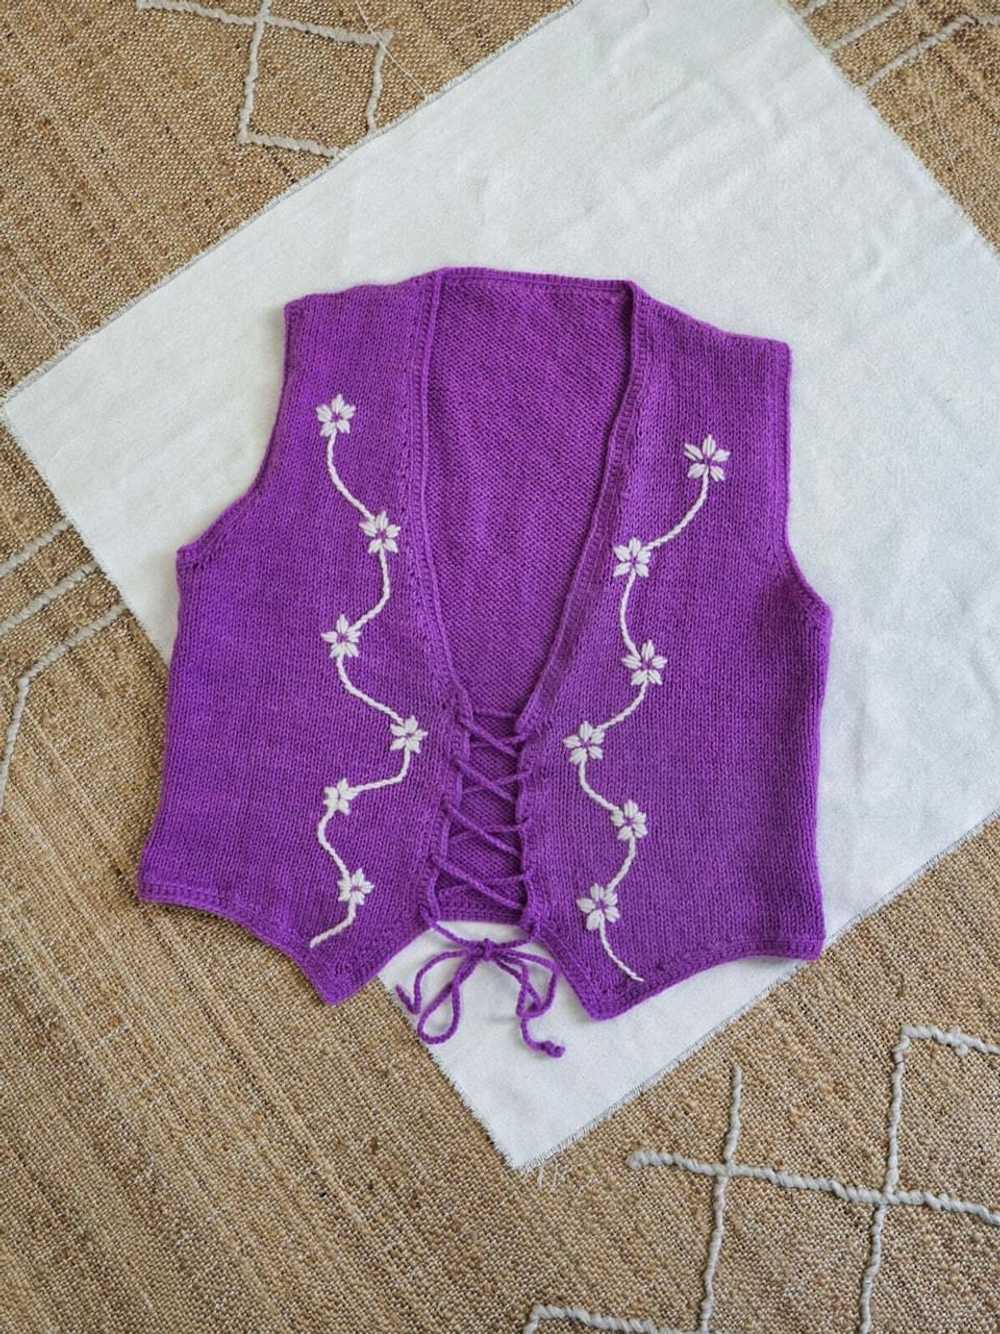 Handmade 70's Lace Up Vest (No Tag) - image 2